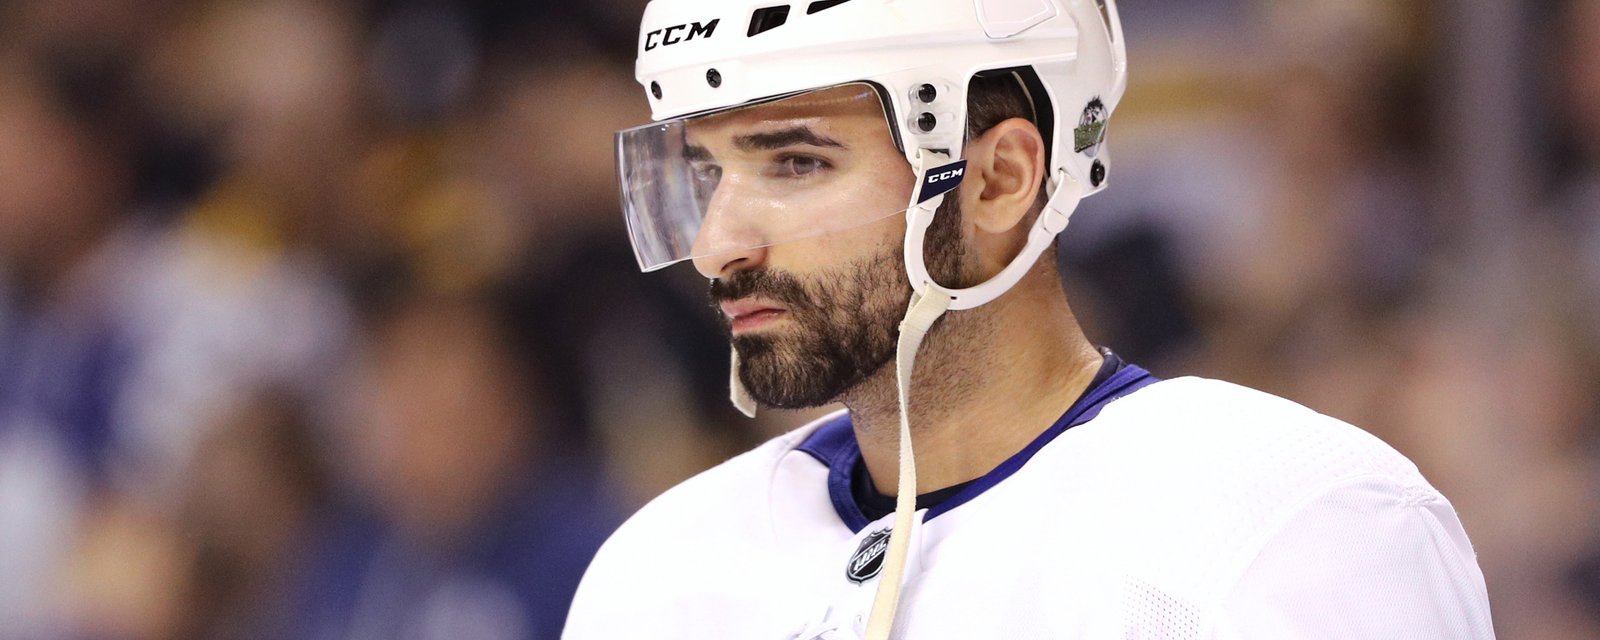 Breaking: Leafs’ Kadri and Muzzin out for precautionary reasons